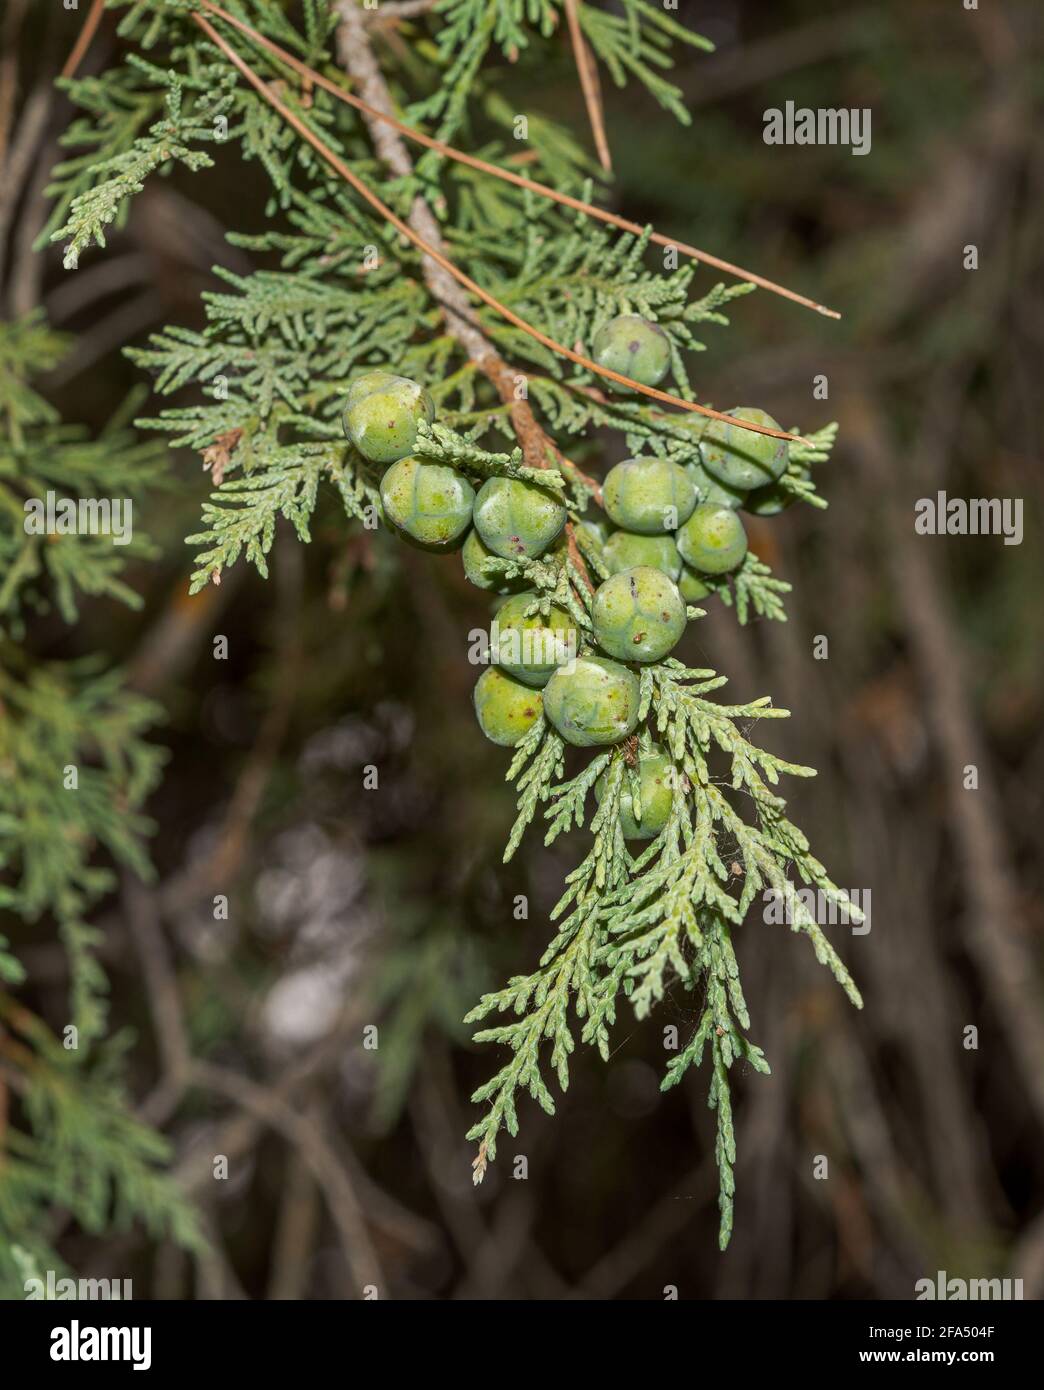 Fruits and leaves of Spanish juniper, Juniperus thurifera. Photo taken in the province of Cuenca, Spain Stock Photo